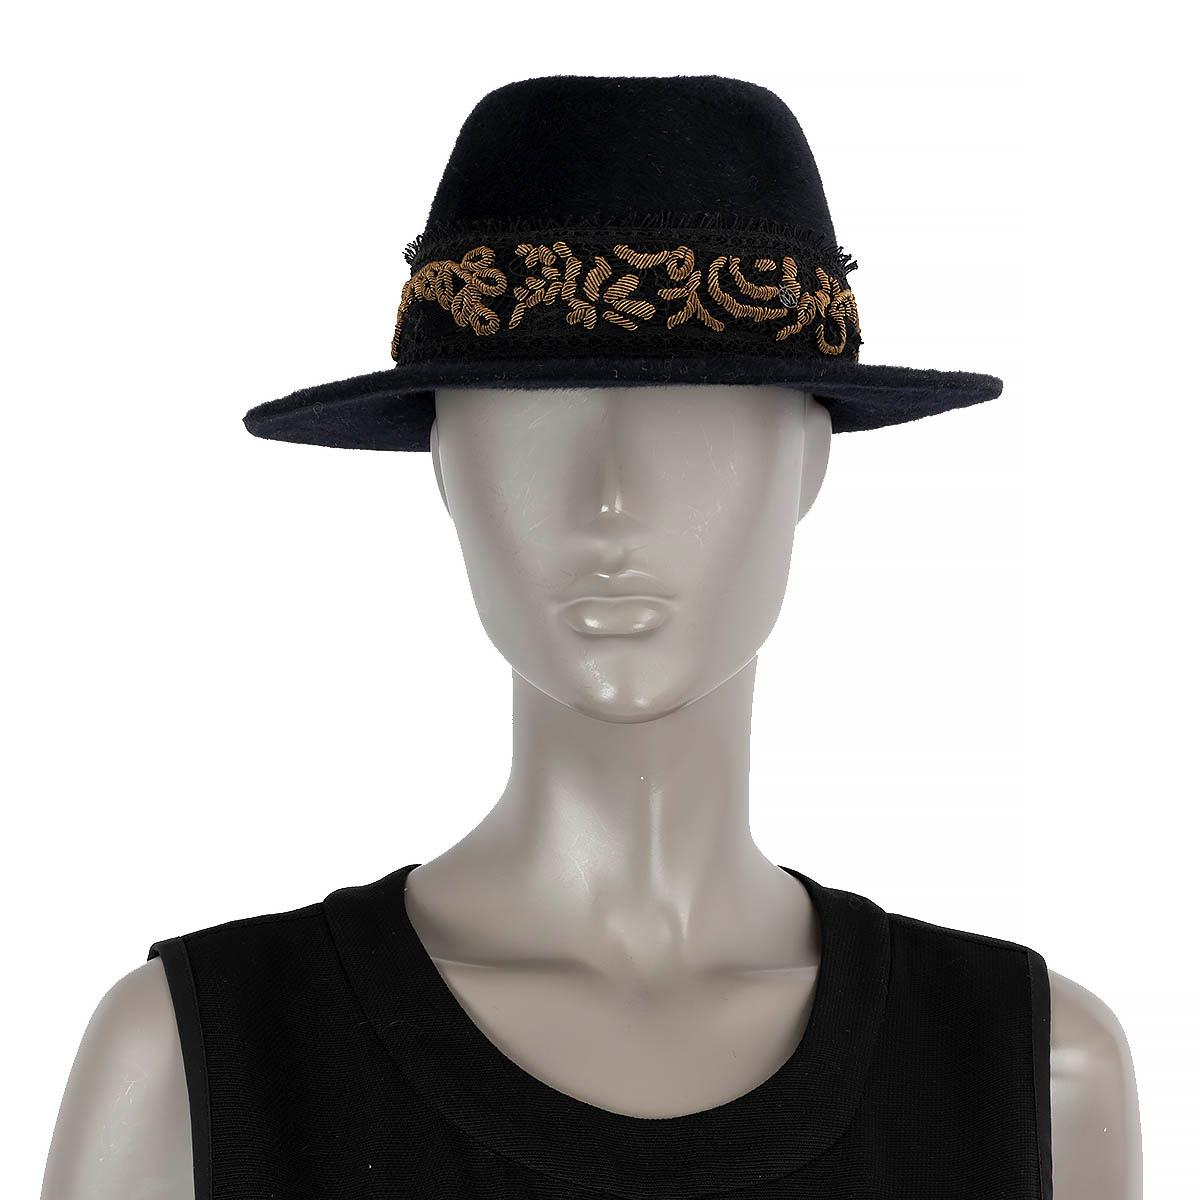 100% authentic Maison Michel Fedora in black wool embroidered in dark gold set on black lace.  Has been worn and is in excellent condition.

Measurements
Tag Size	S
Inside Circumference	54cm (21.1in)

All our listings include only the listed item